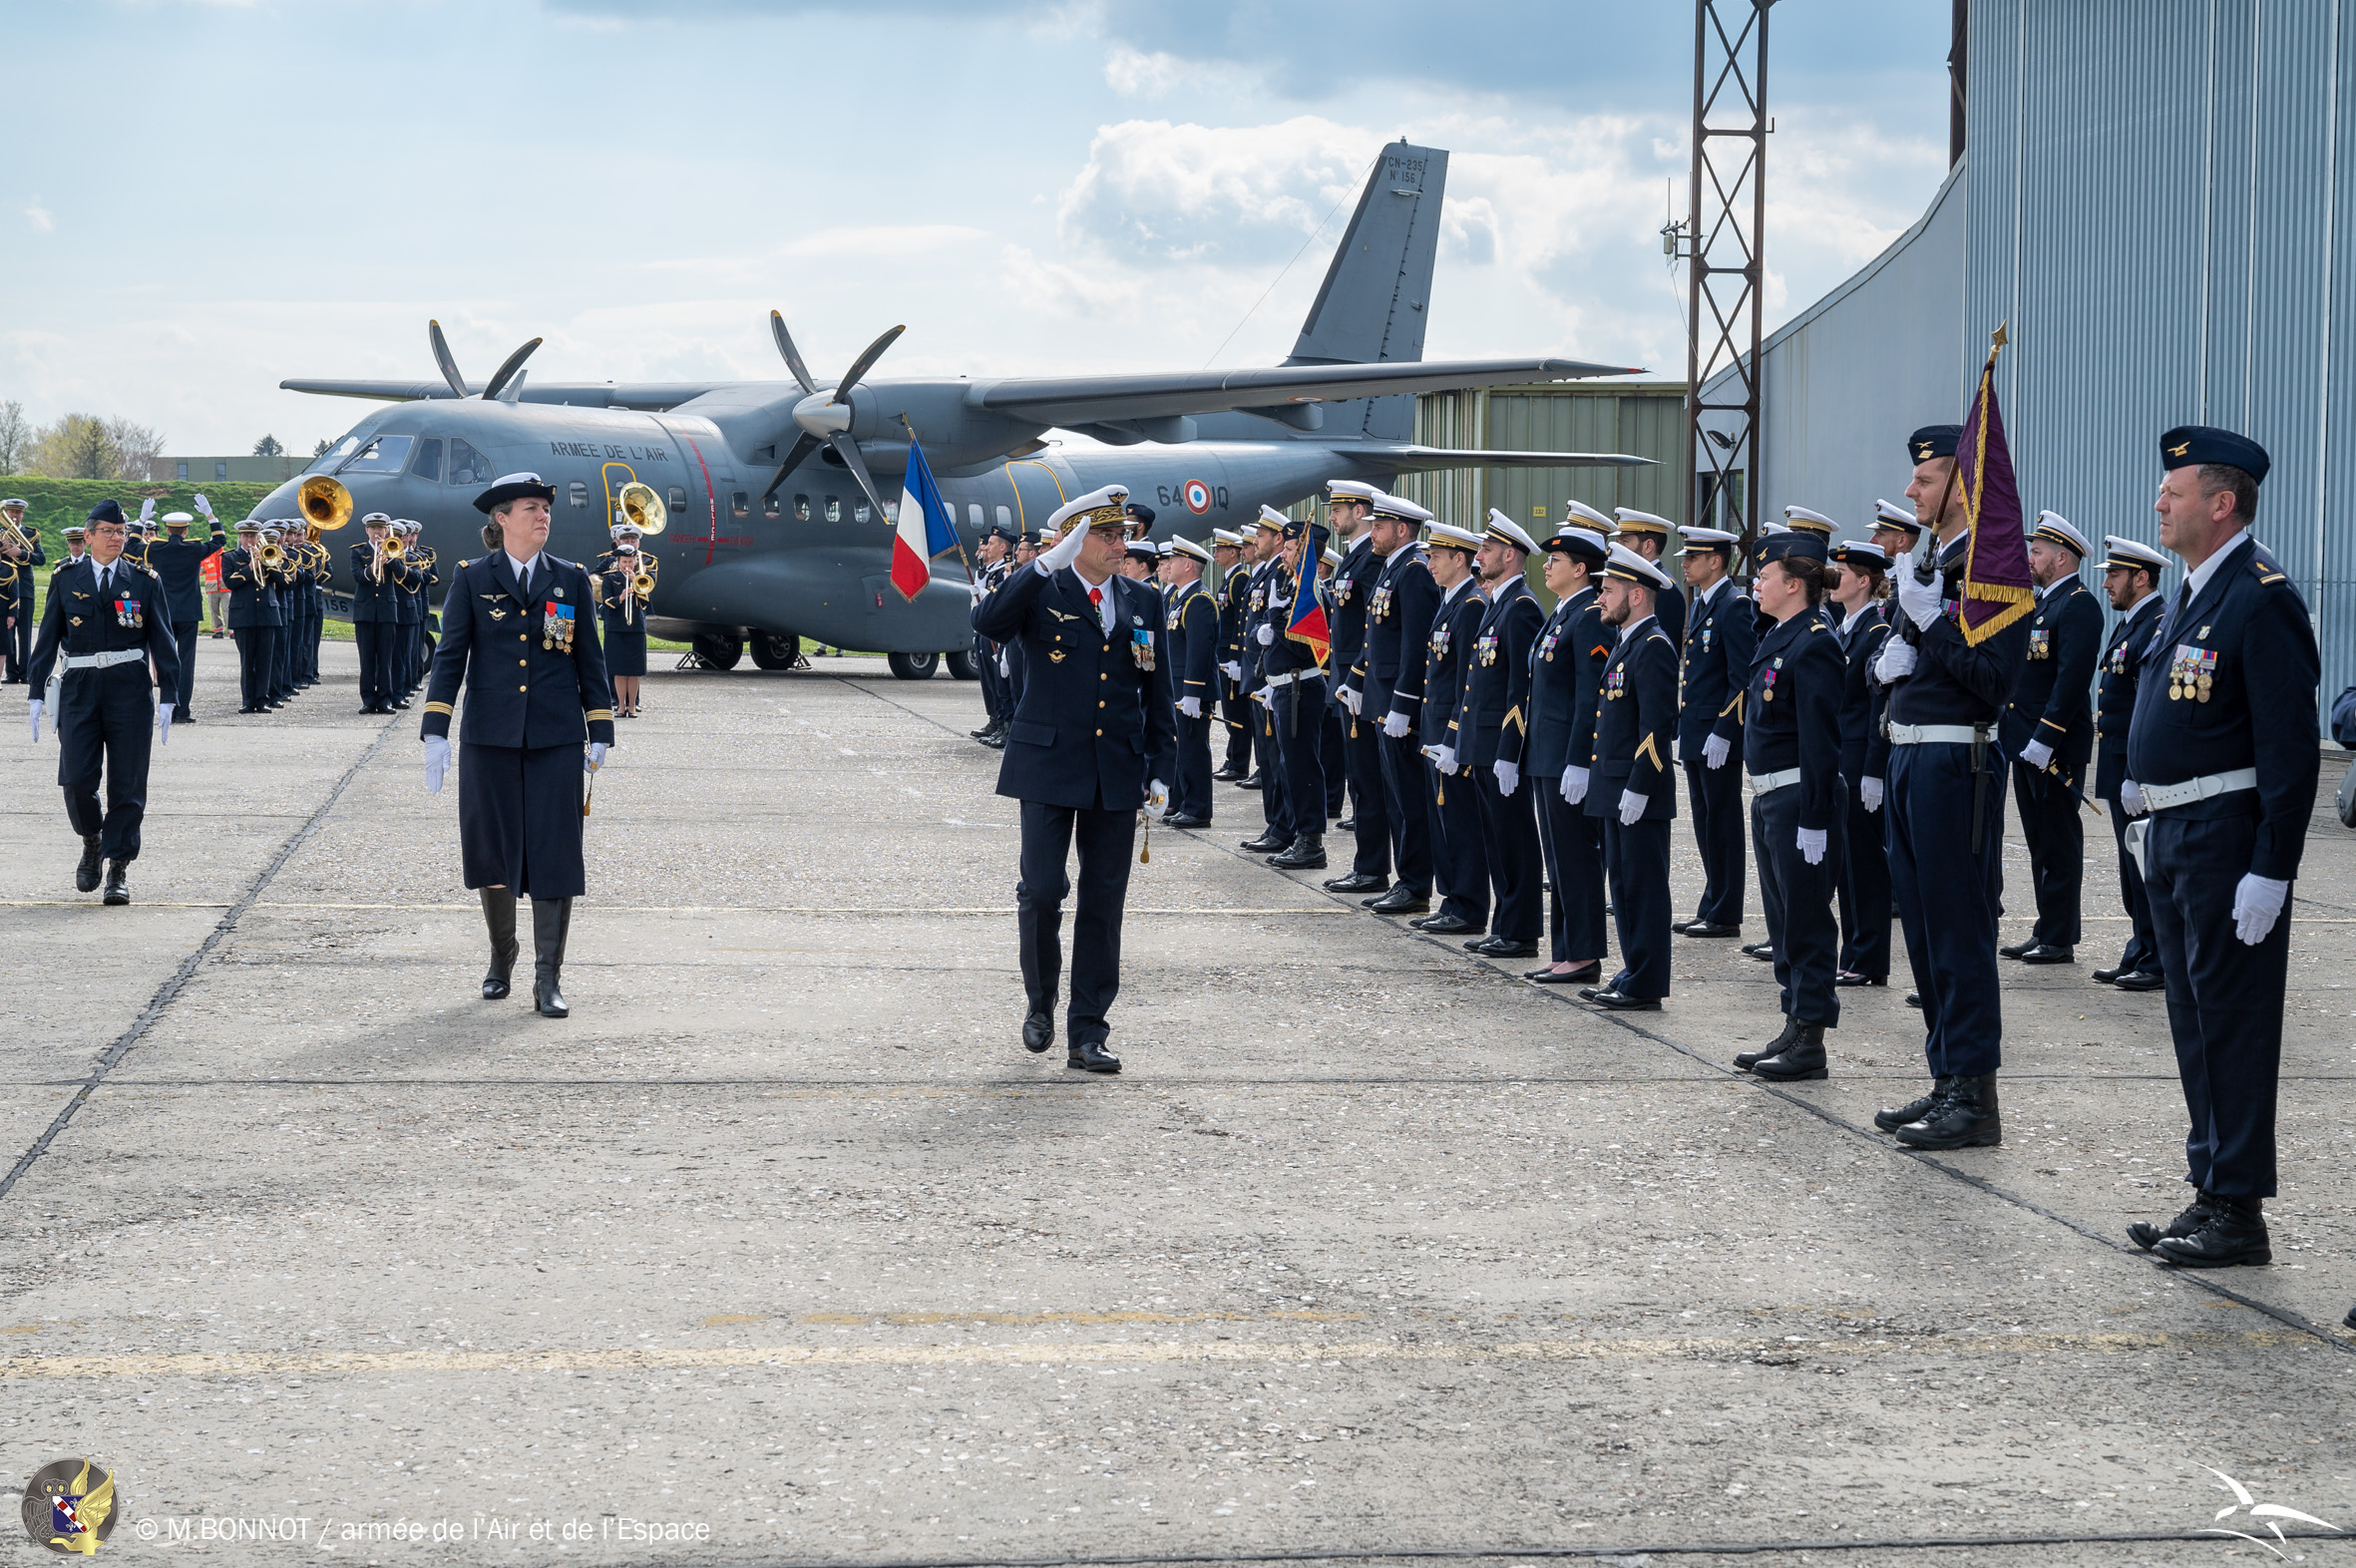 Congratulations to France for 30 years with the CASA CN-235